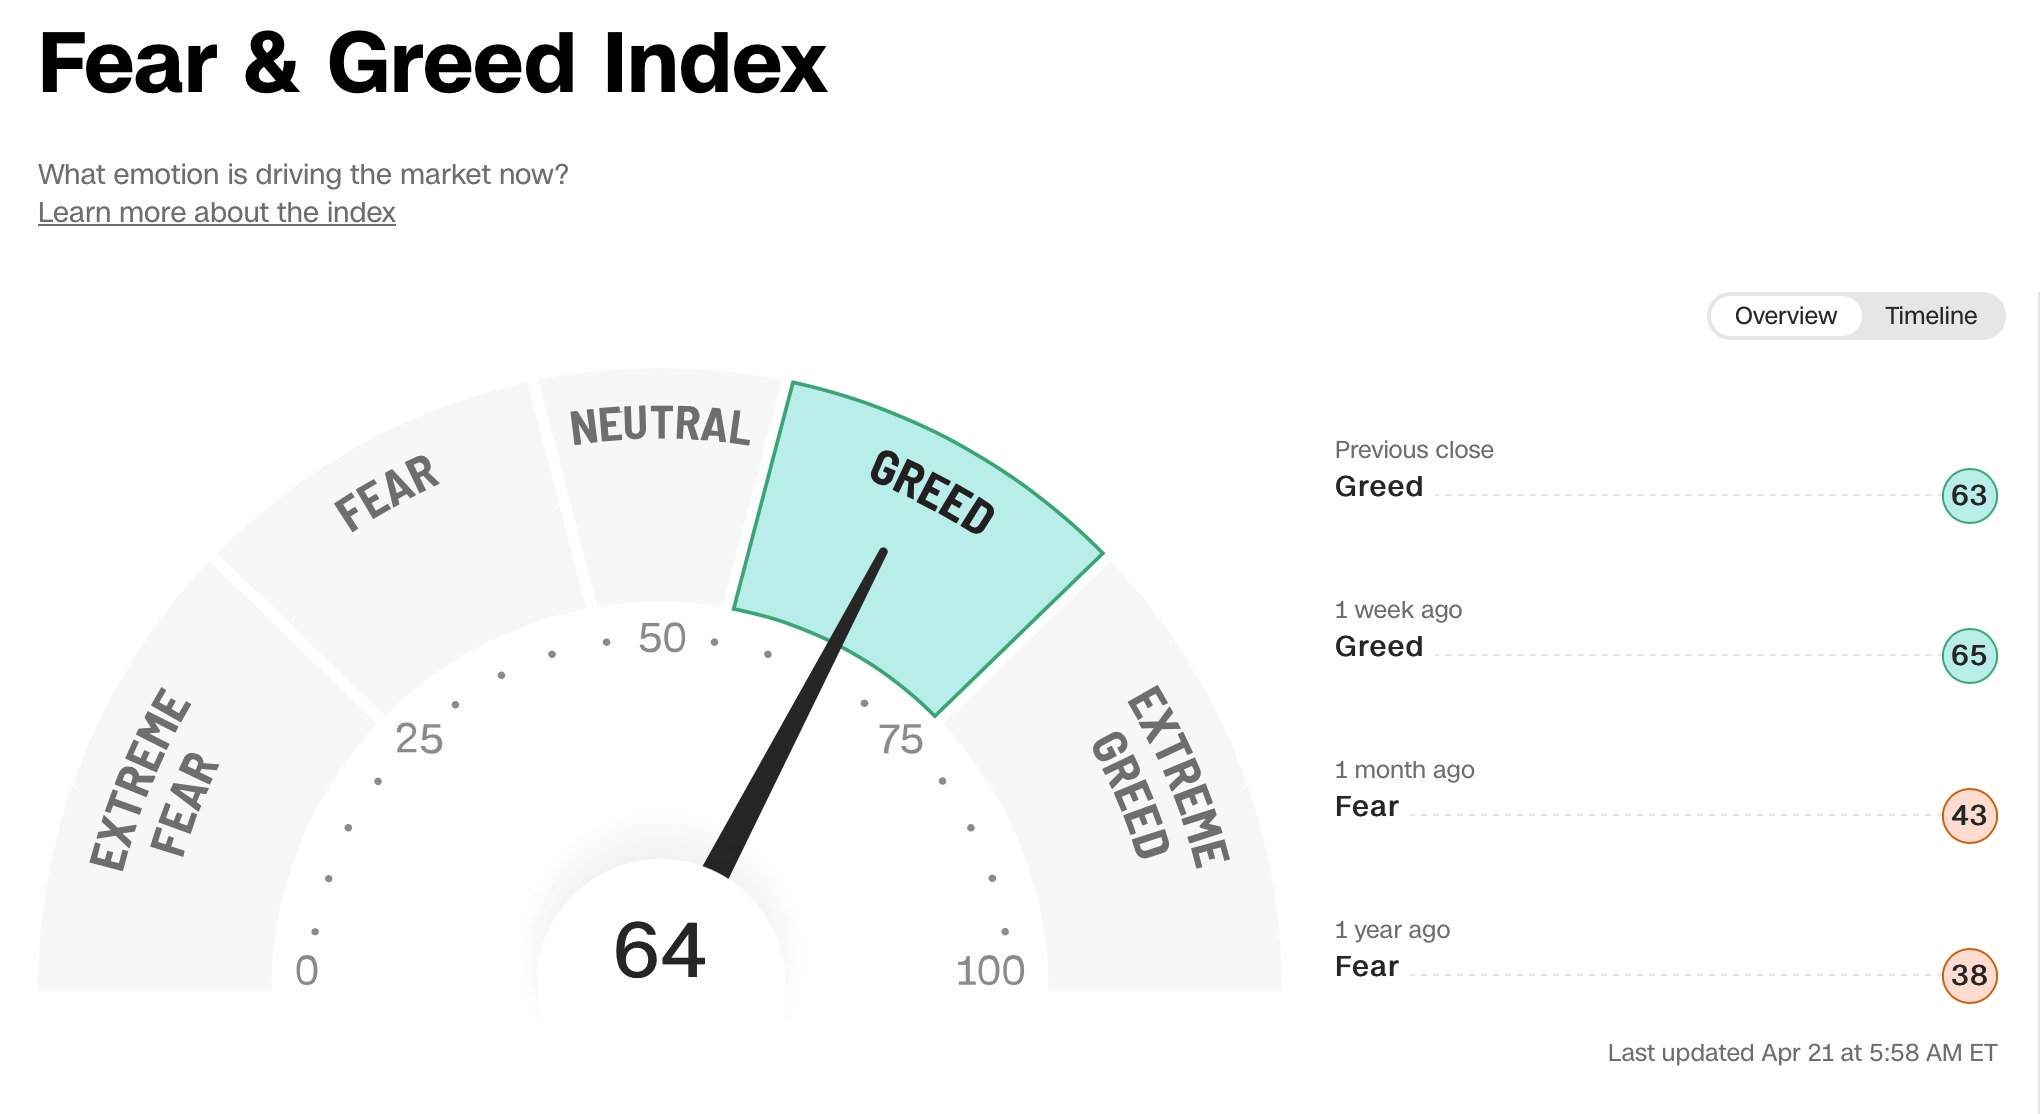 Sentiment indicator - Fear & Greed Index